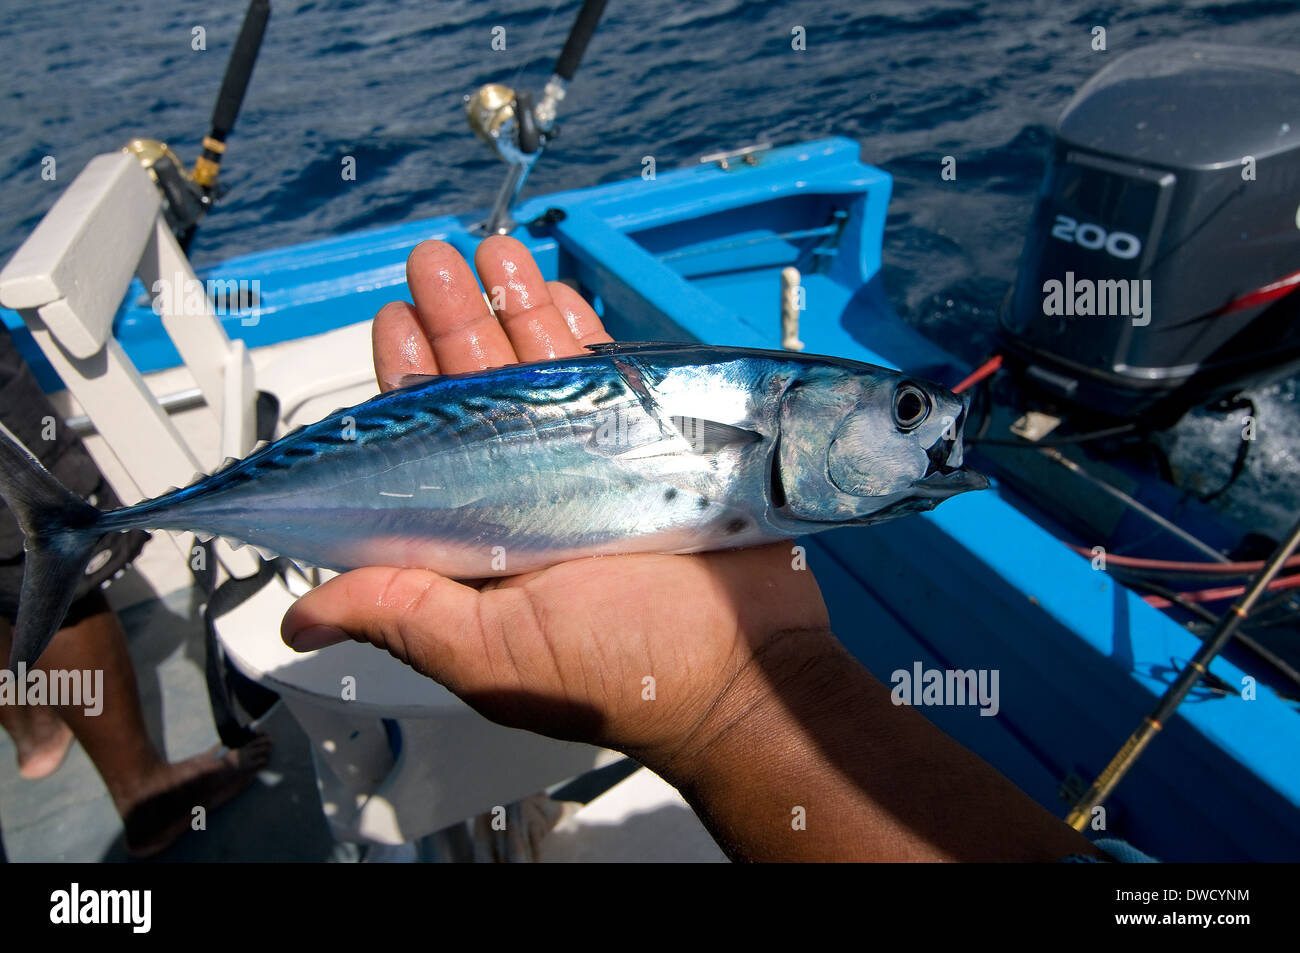 A fresh-caught bonito on a St. Kitts charter boat makes a great